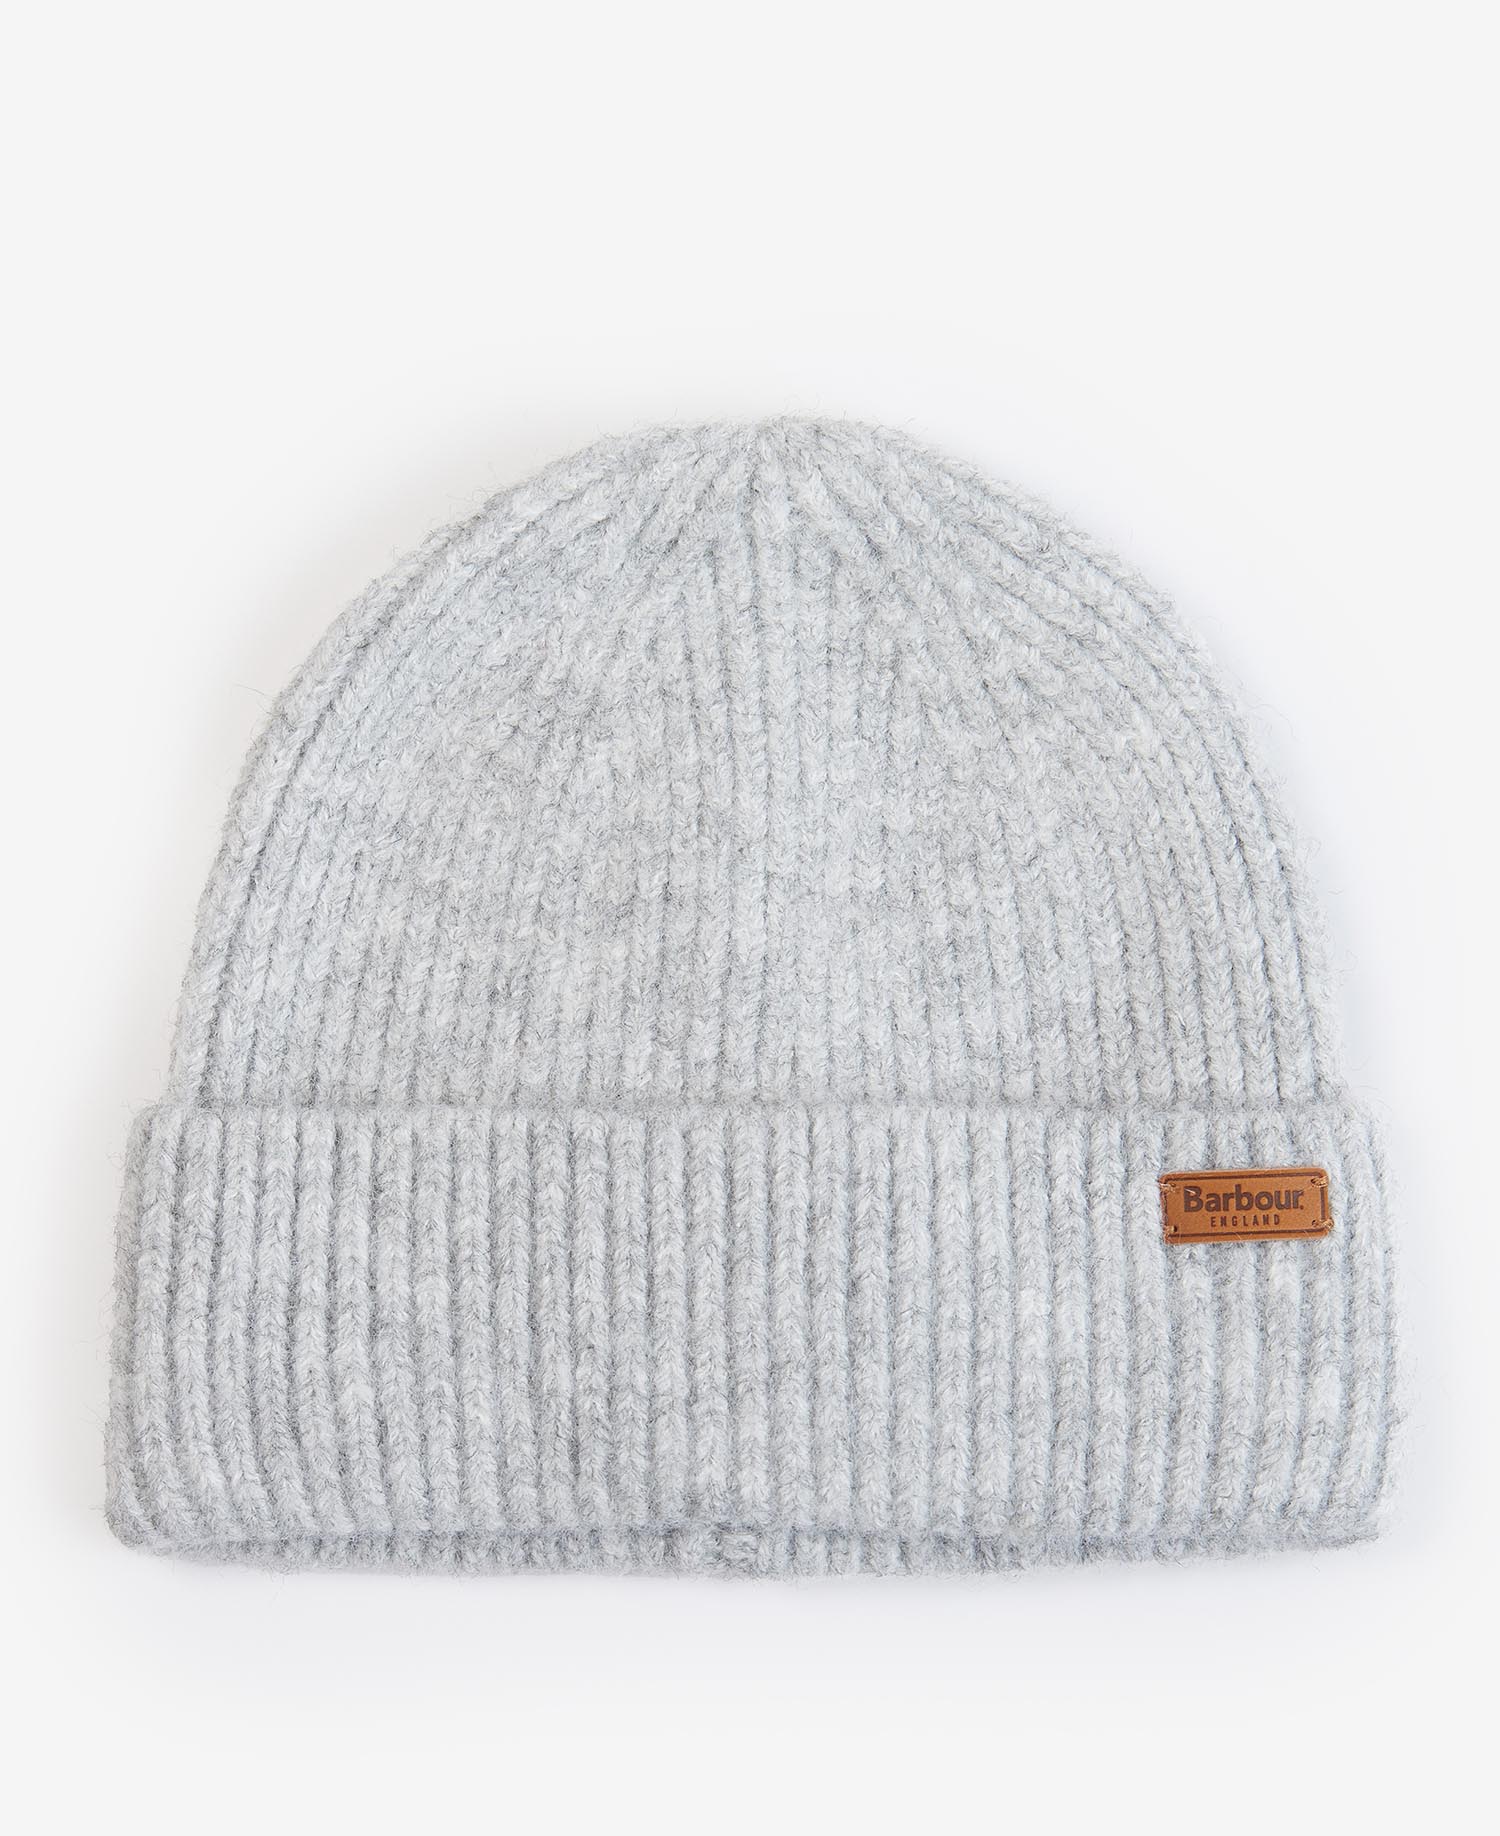 Barbour Pendle Beanie Grey